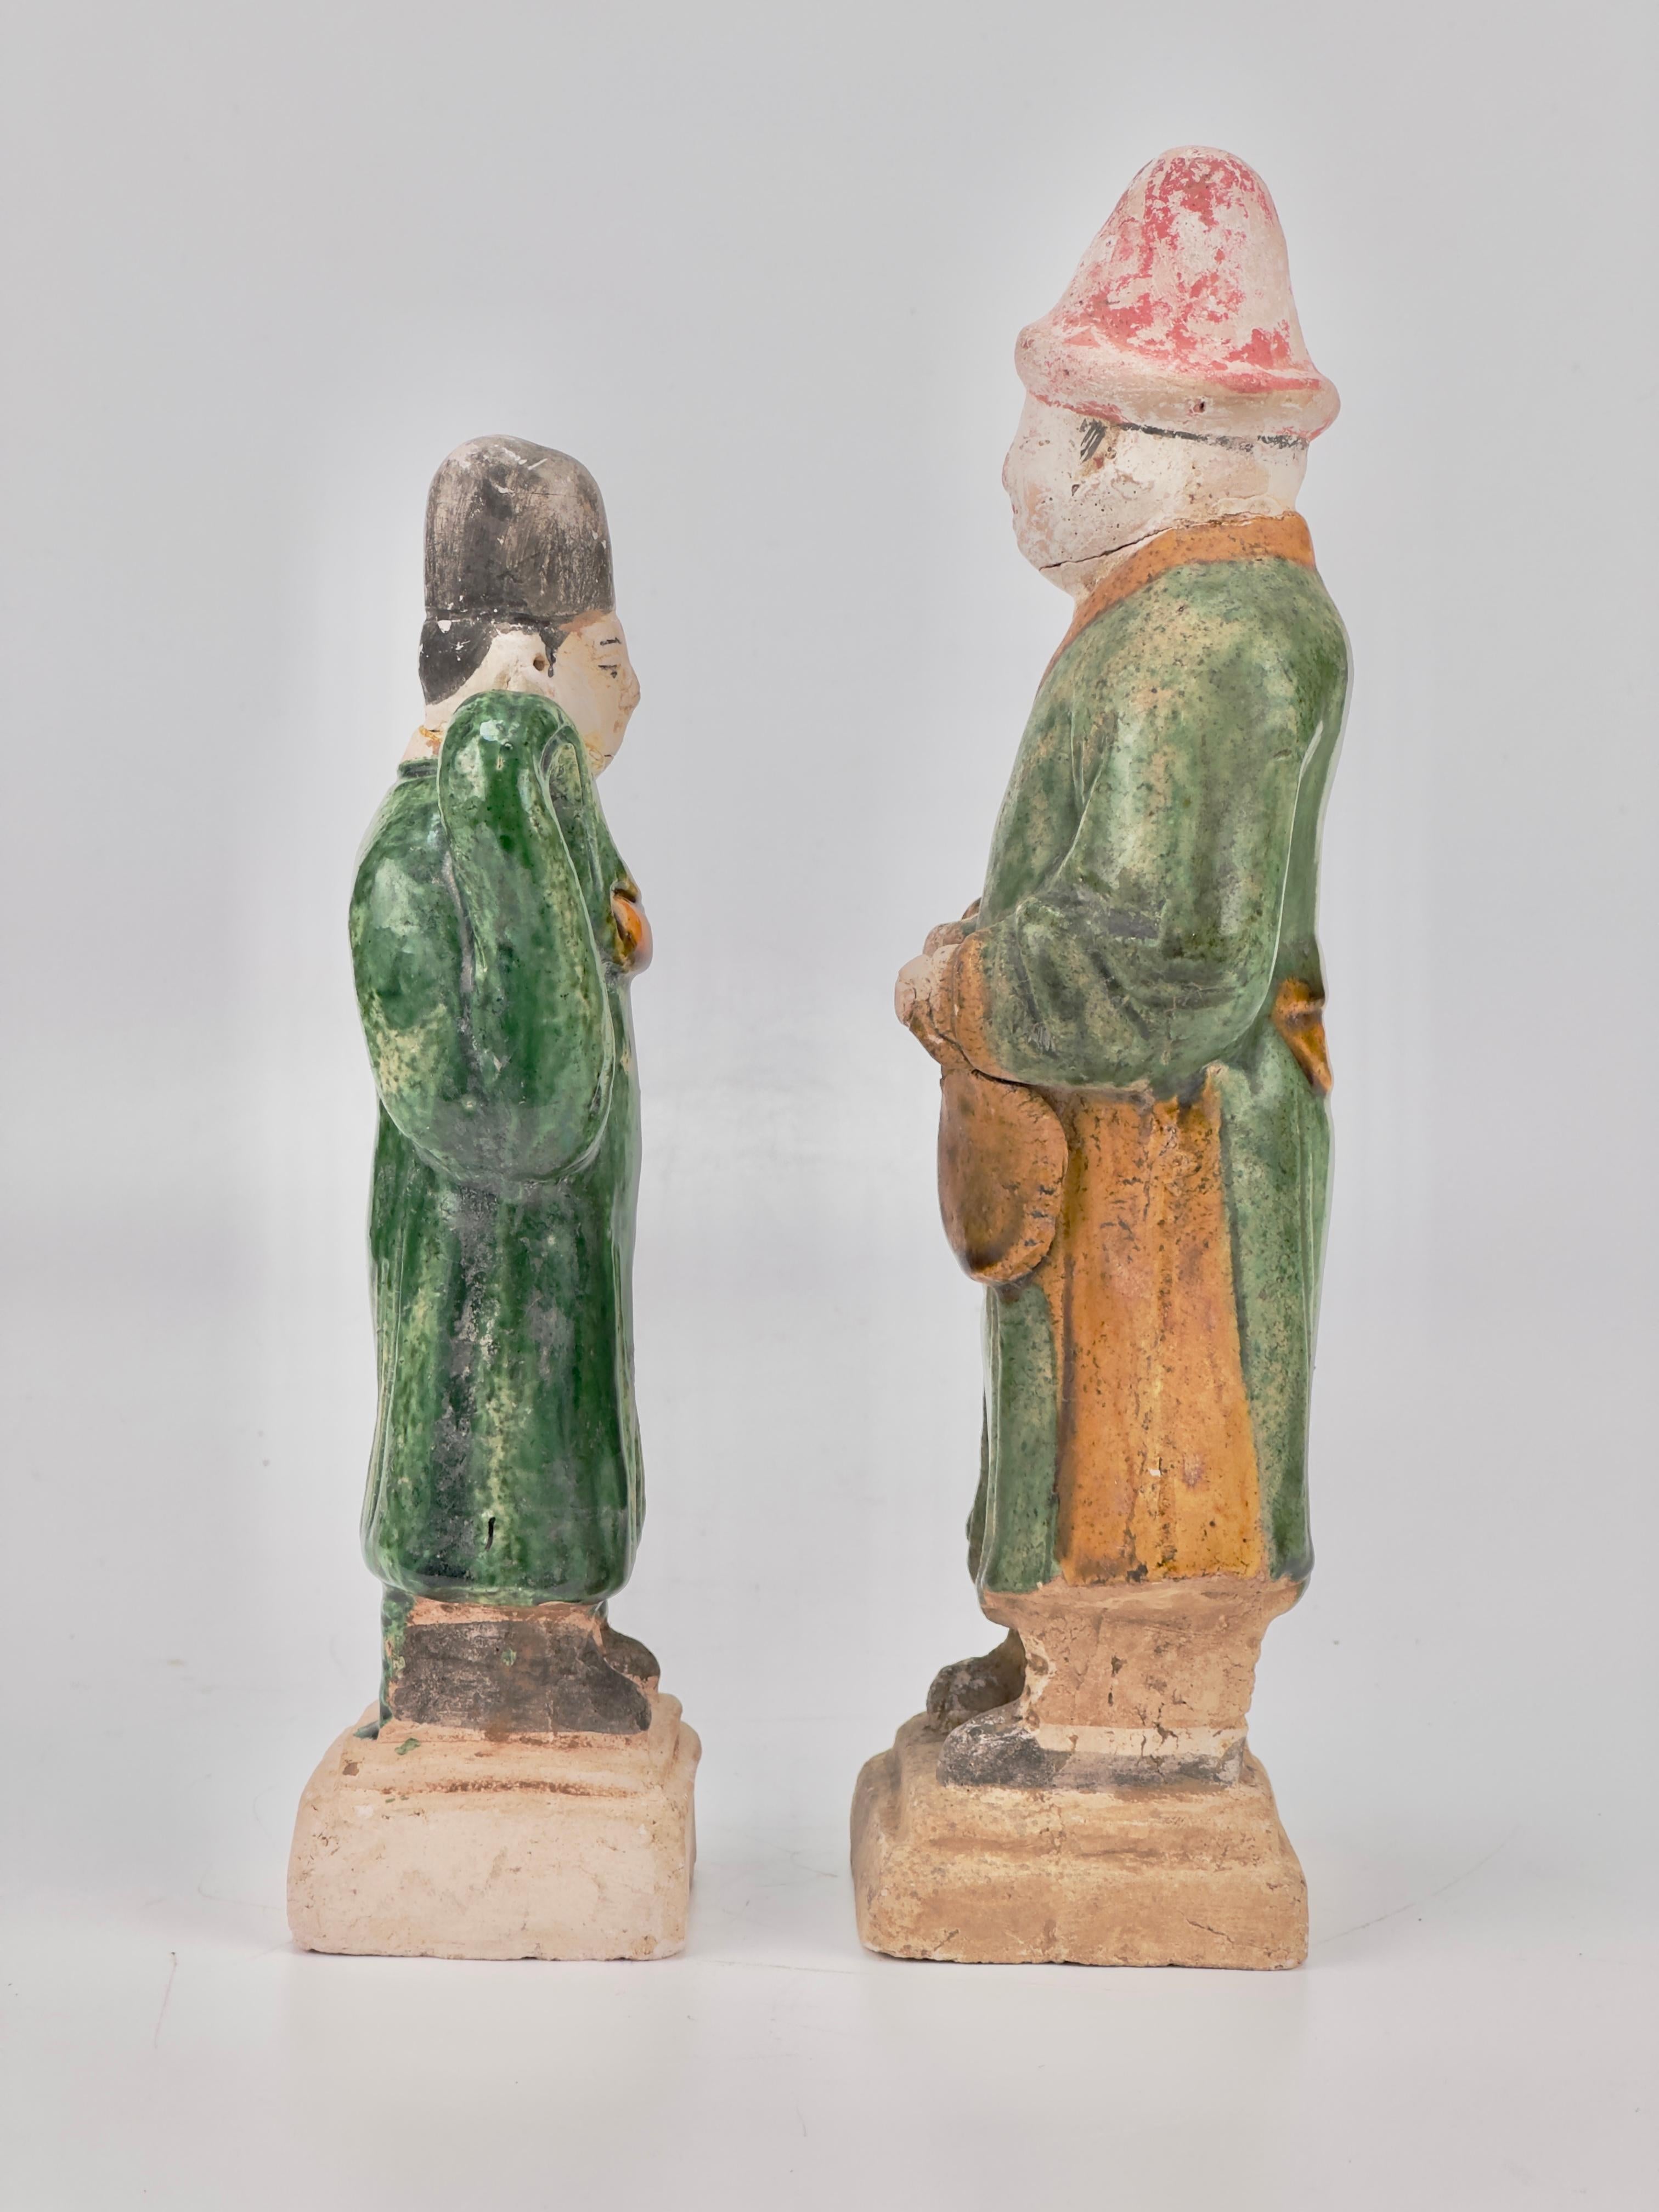 Statues of Chinese dignitaries crafted from terracotta, featuring glazes in green and ocher, are set on rectangular bases. The wide-sleeved robes and craftsmanship, along with the cylindrical flat hats, indicate their Chinese origin, specifically